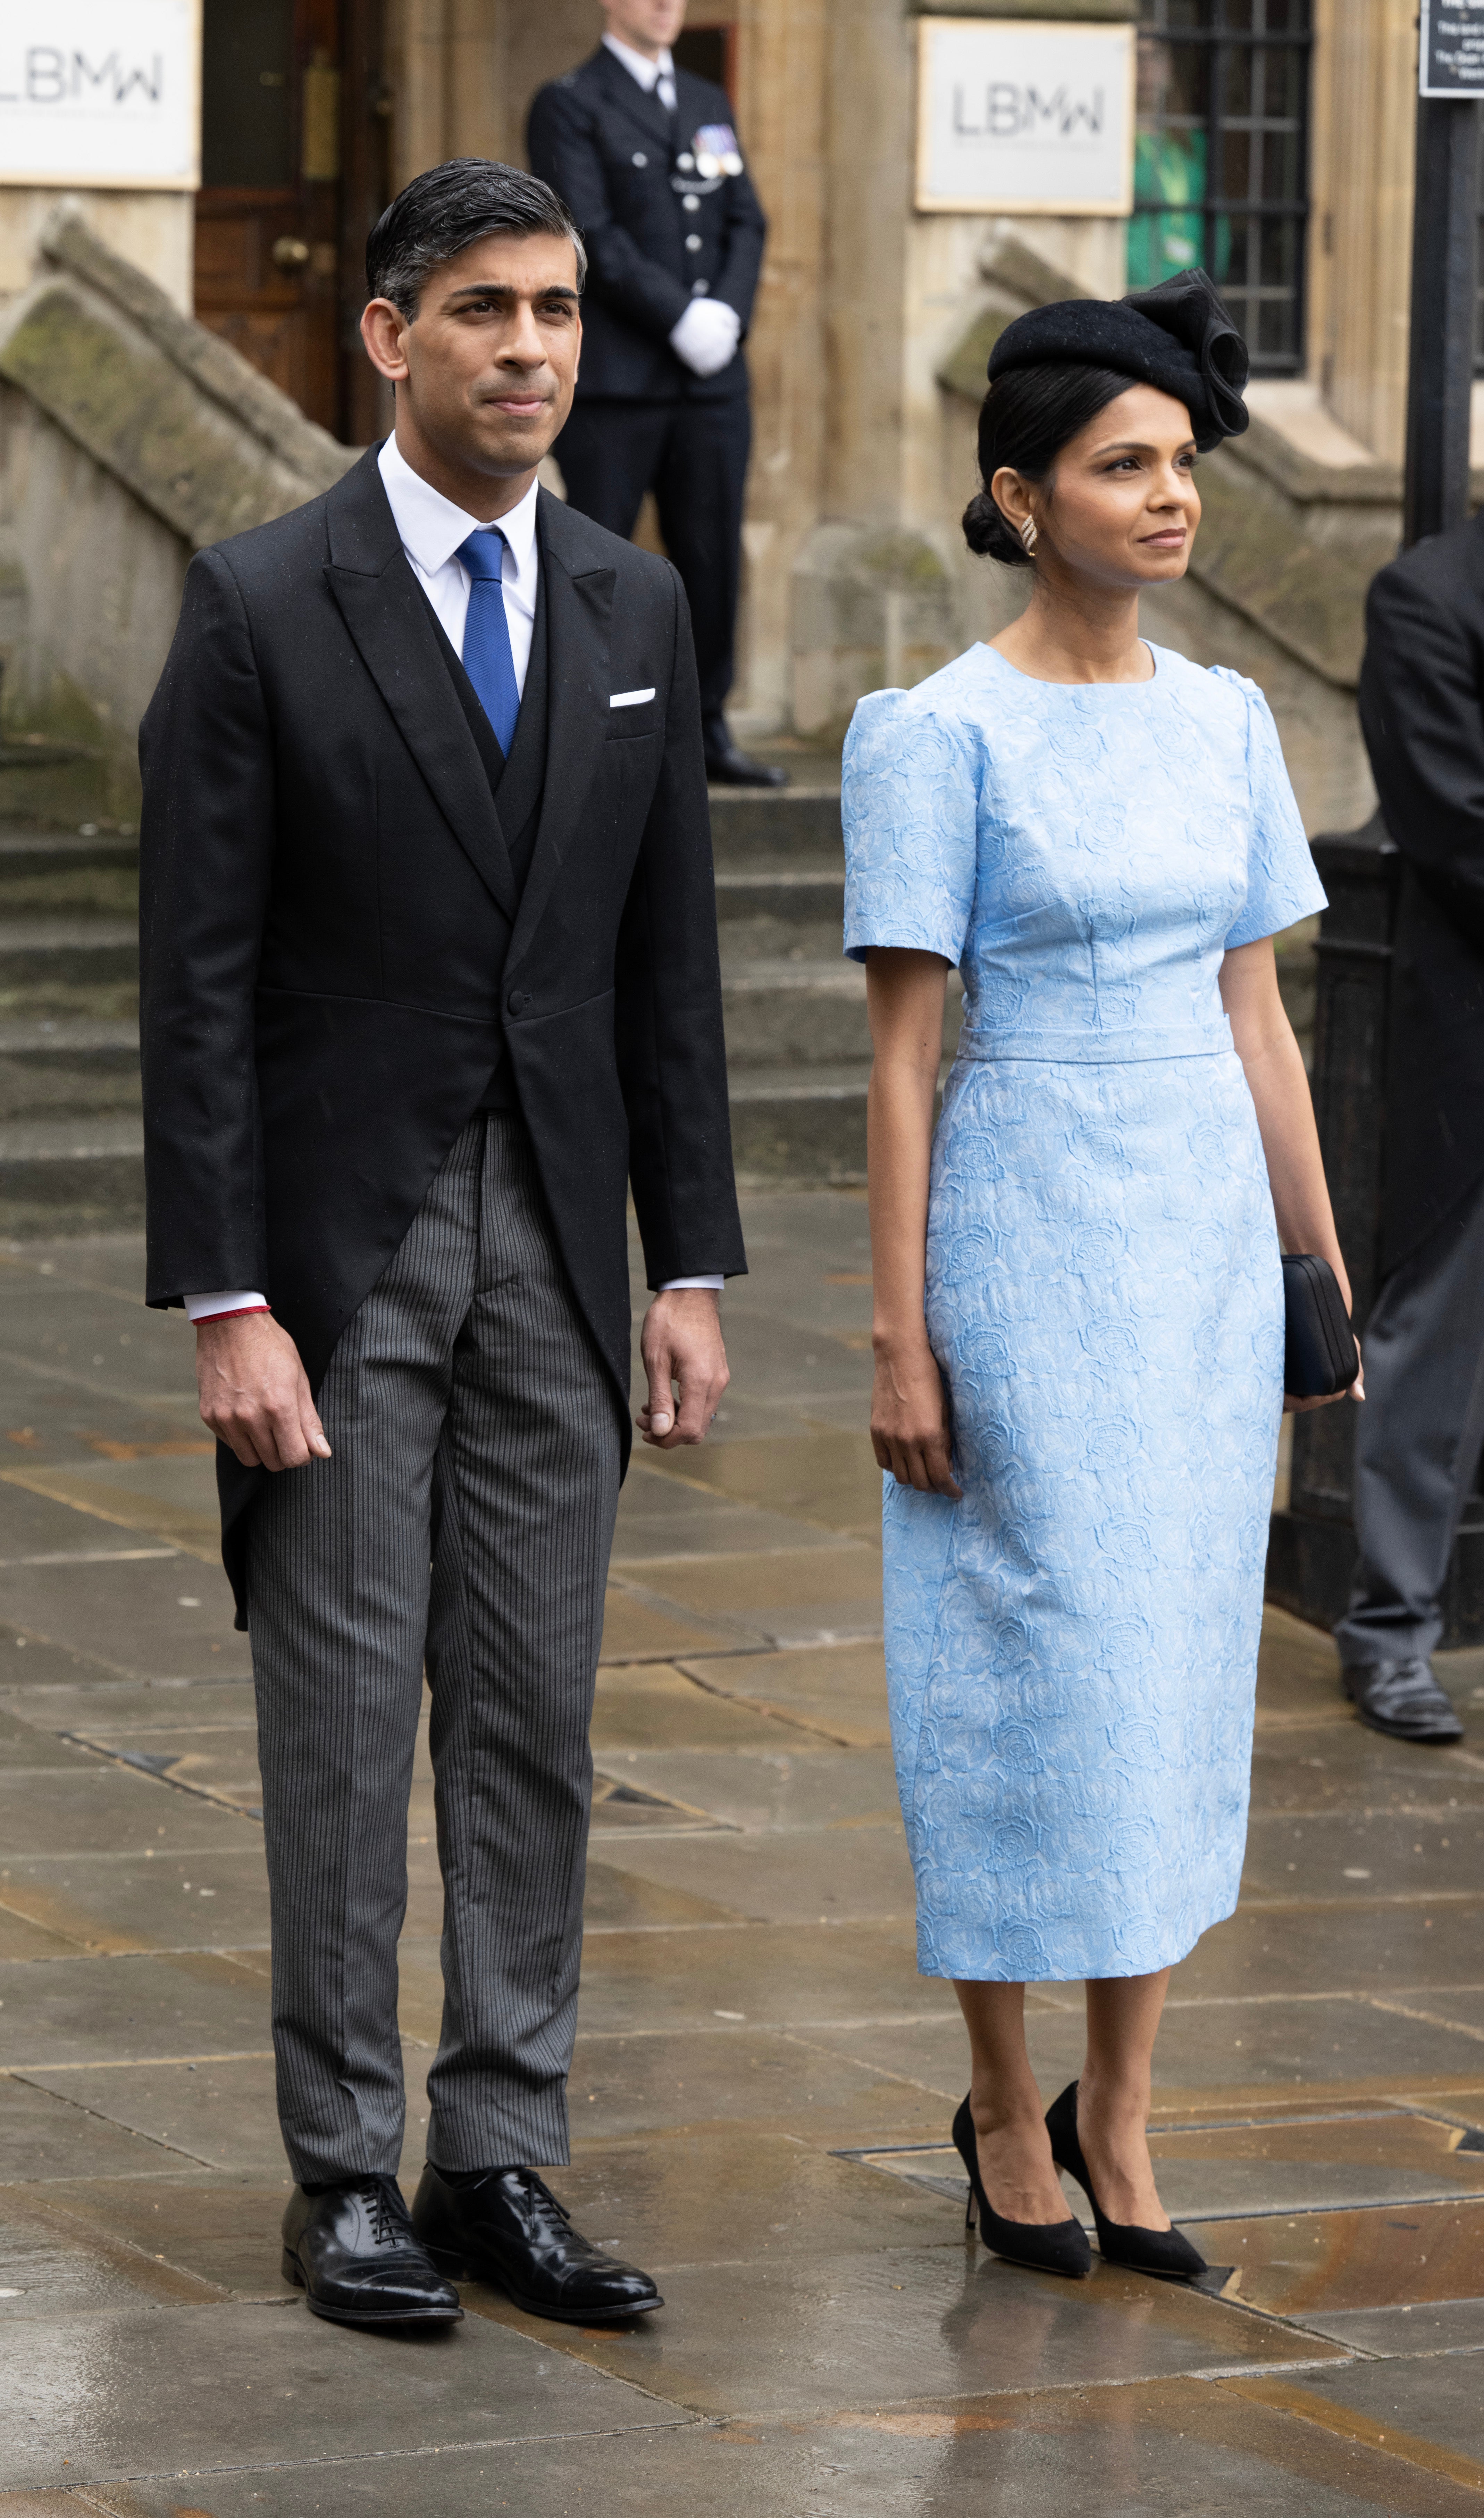 Prime minister Rishi Sunk and his wife Akshata Murthy attend the Coronation of King Charles III and Queen Camilla at Westminster Abbey on May 6, 2023